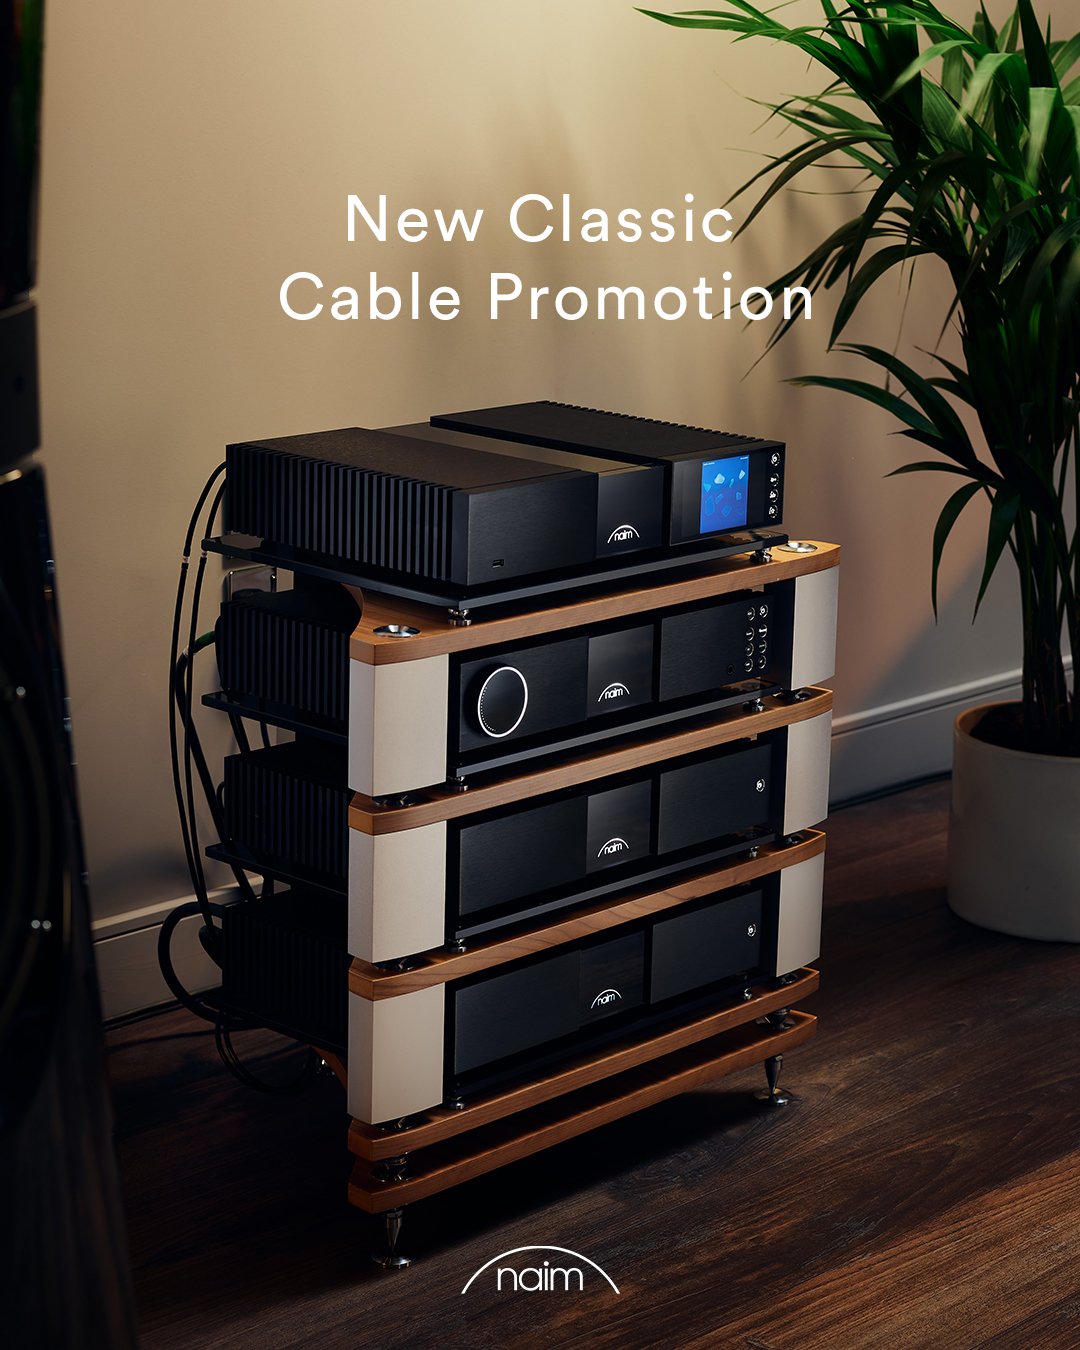 Naim New Classic Cable Promotion